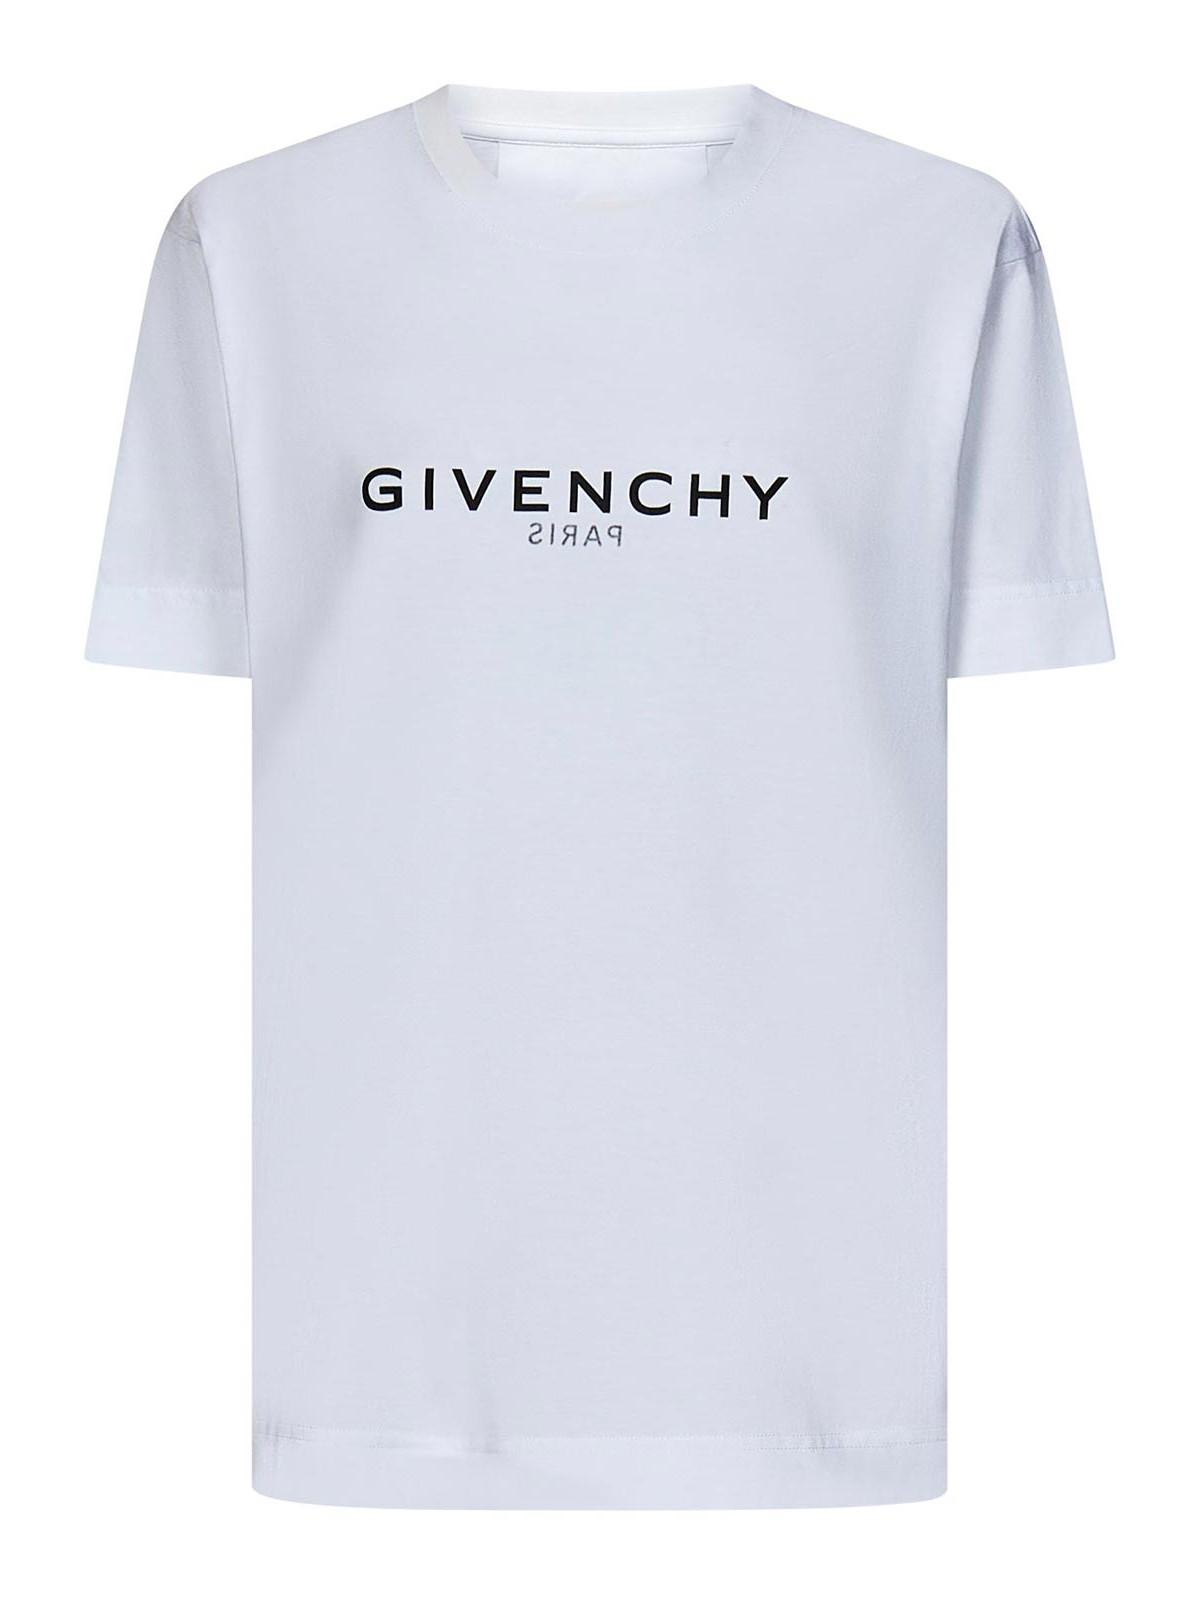 Givenchy White Cotton Jersey T-shirt